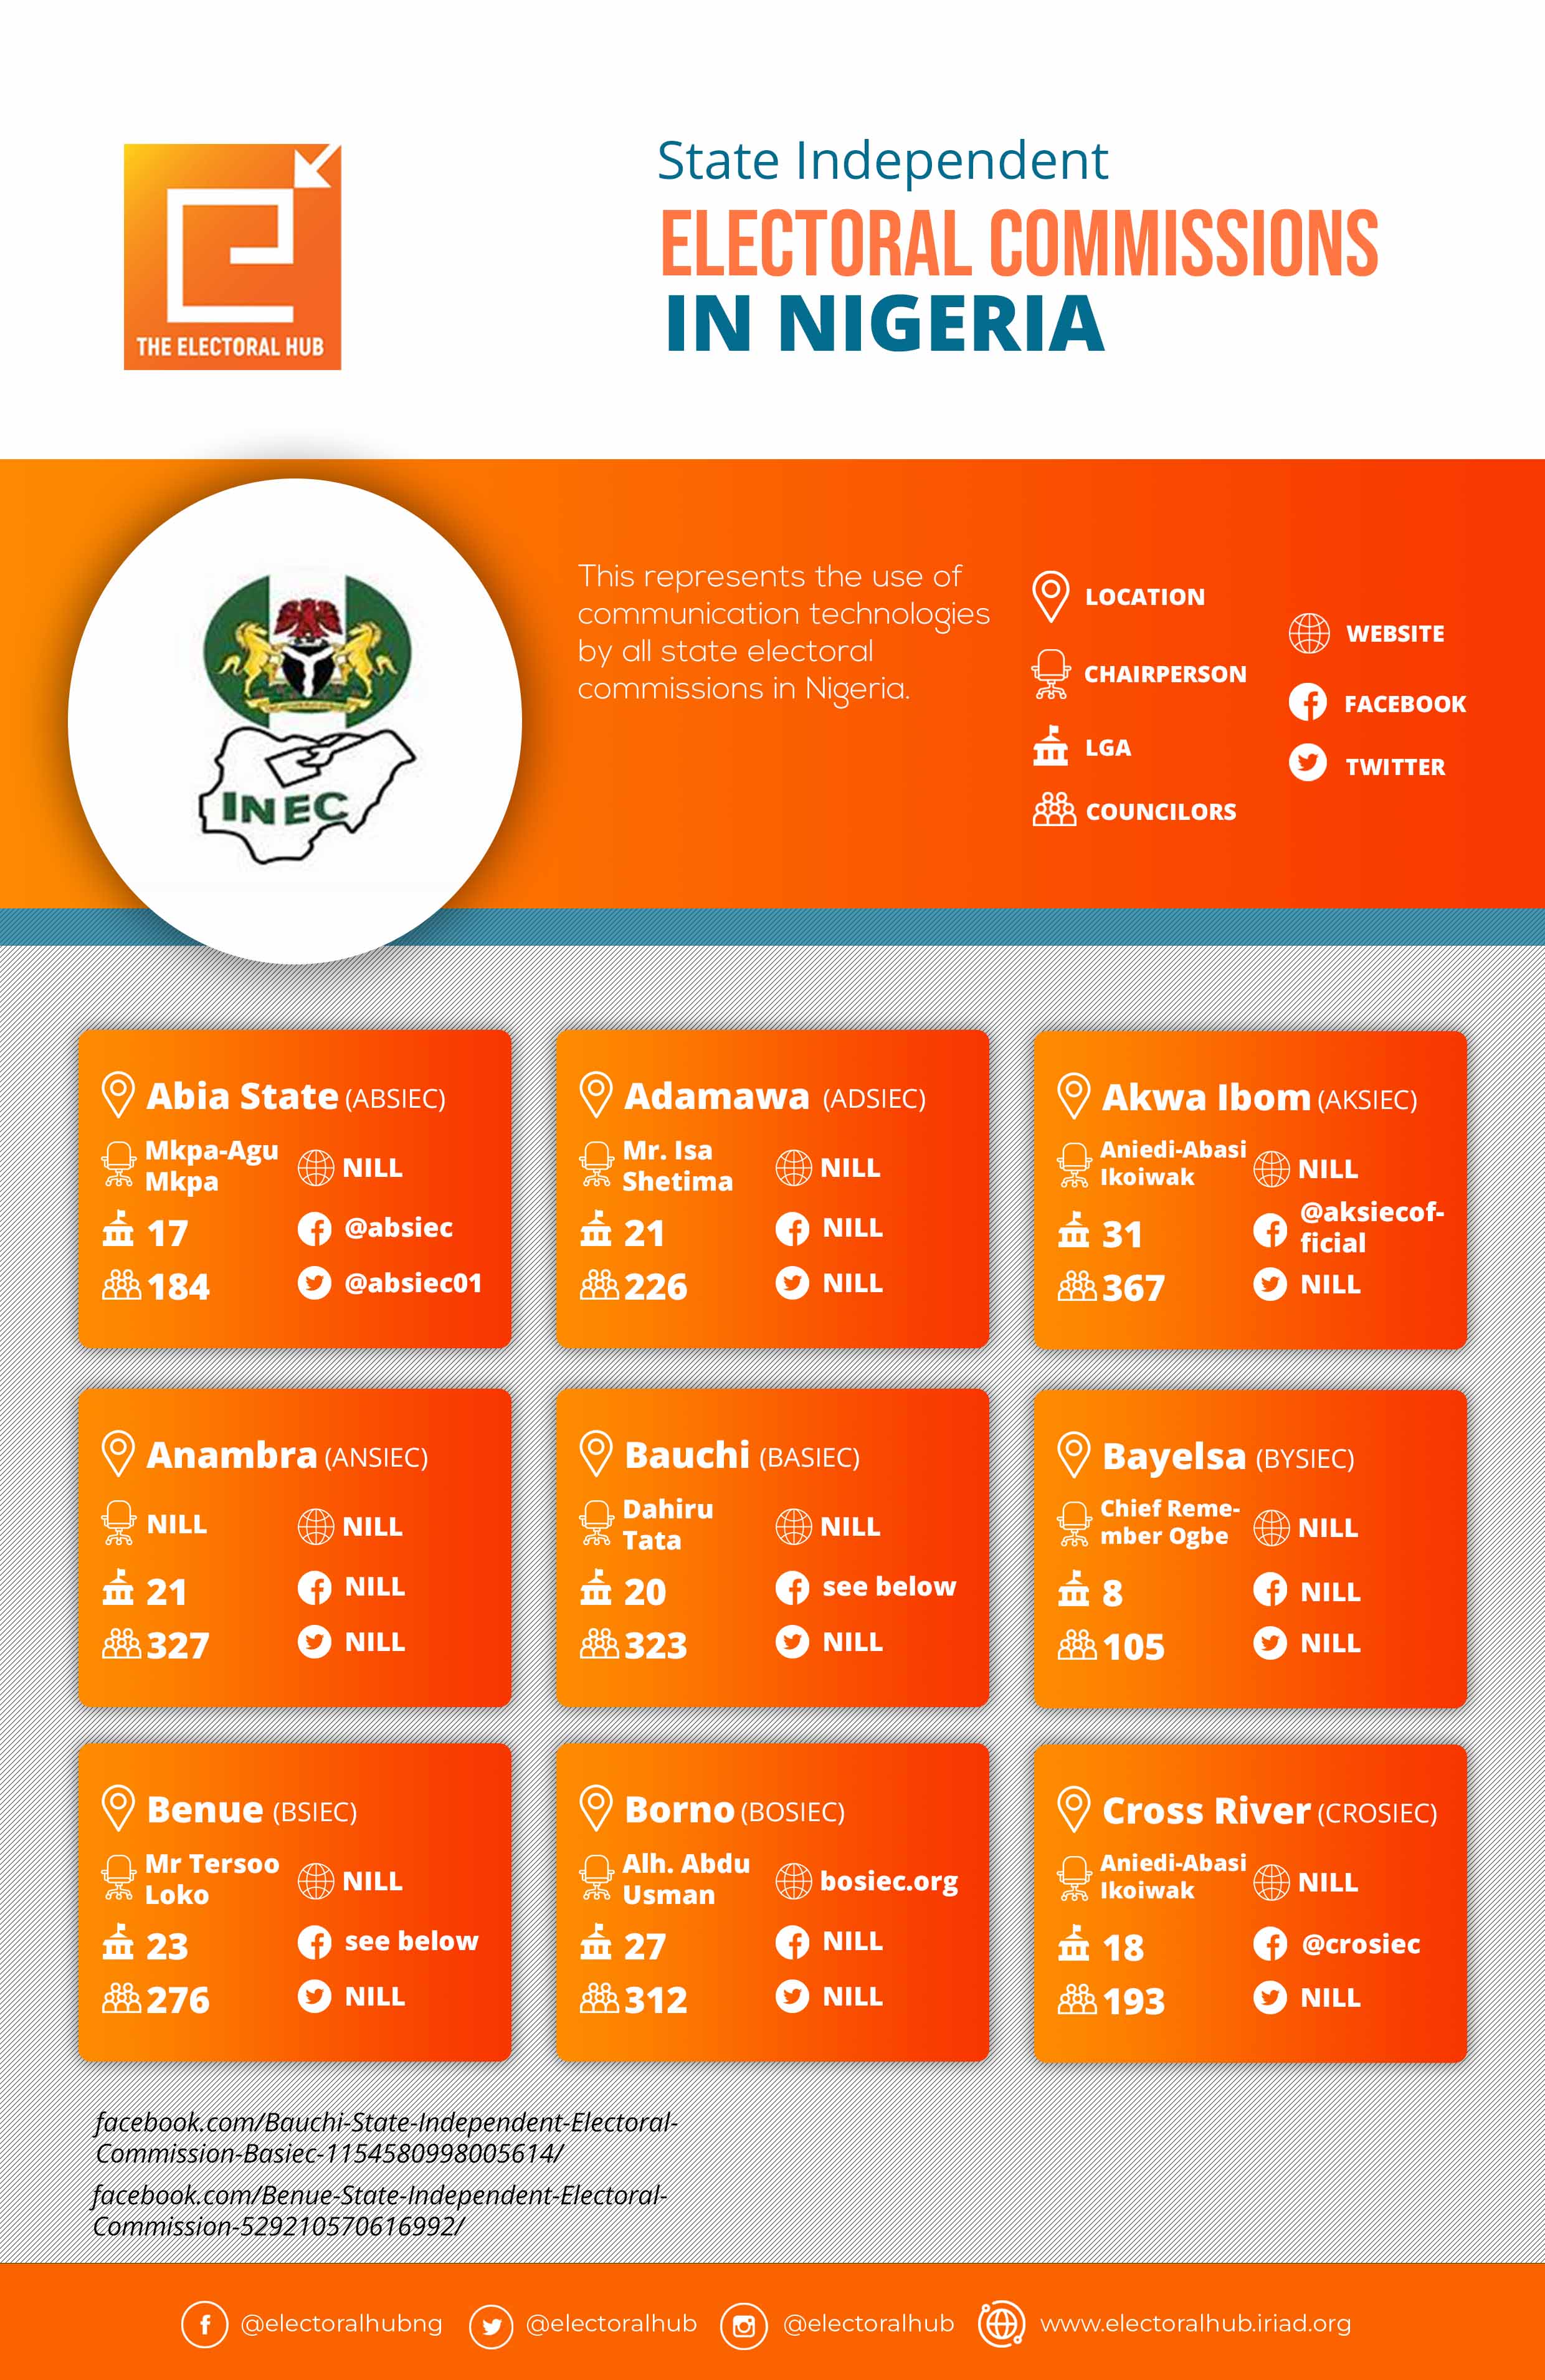 State Independent Electoral Commissions in Nigeria